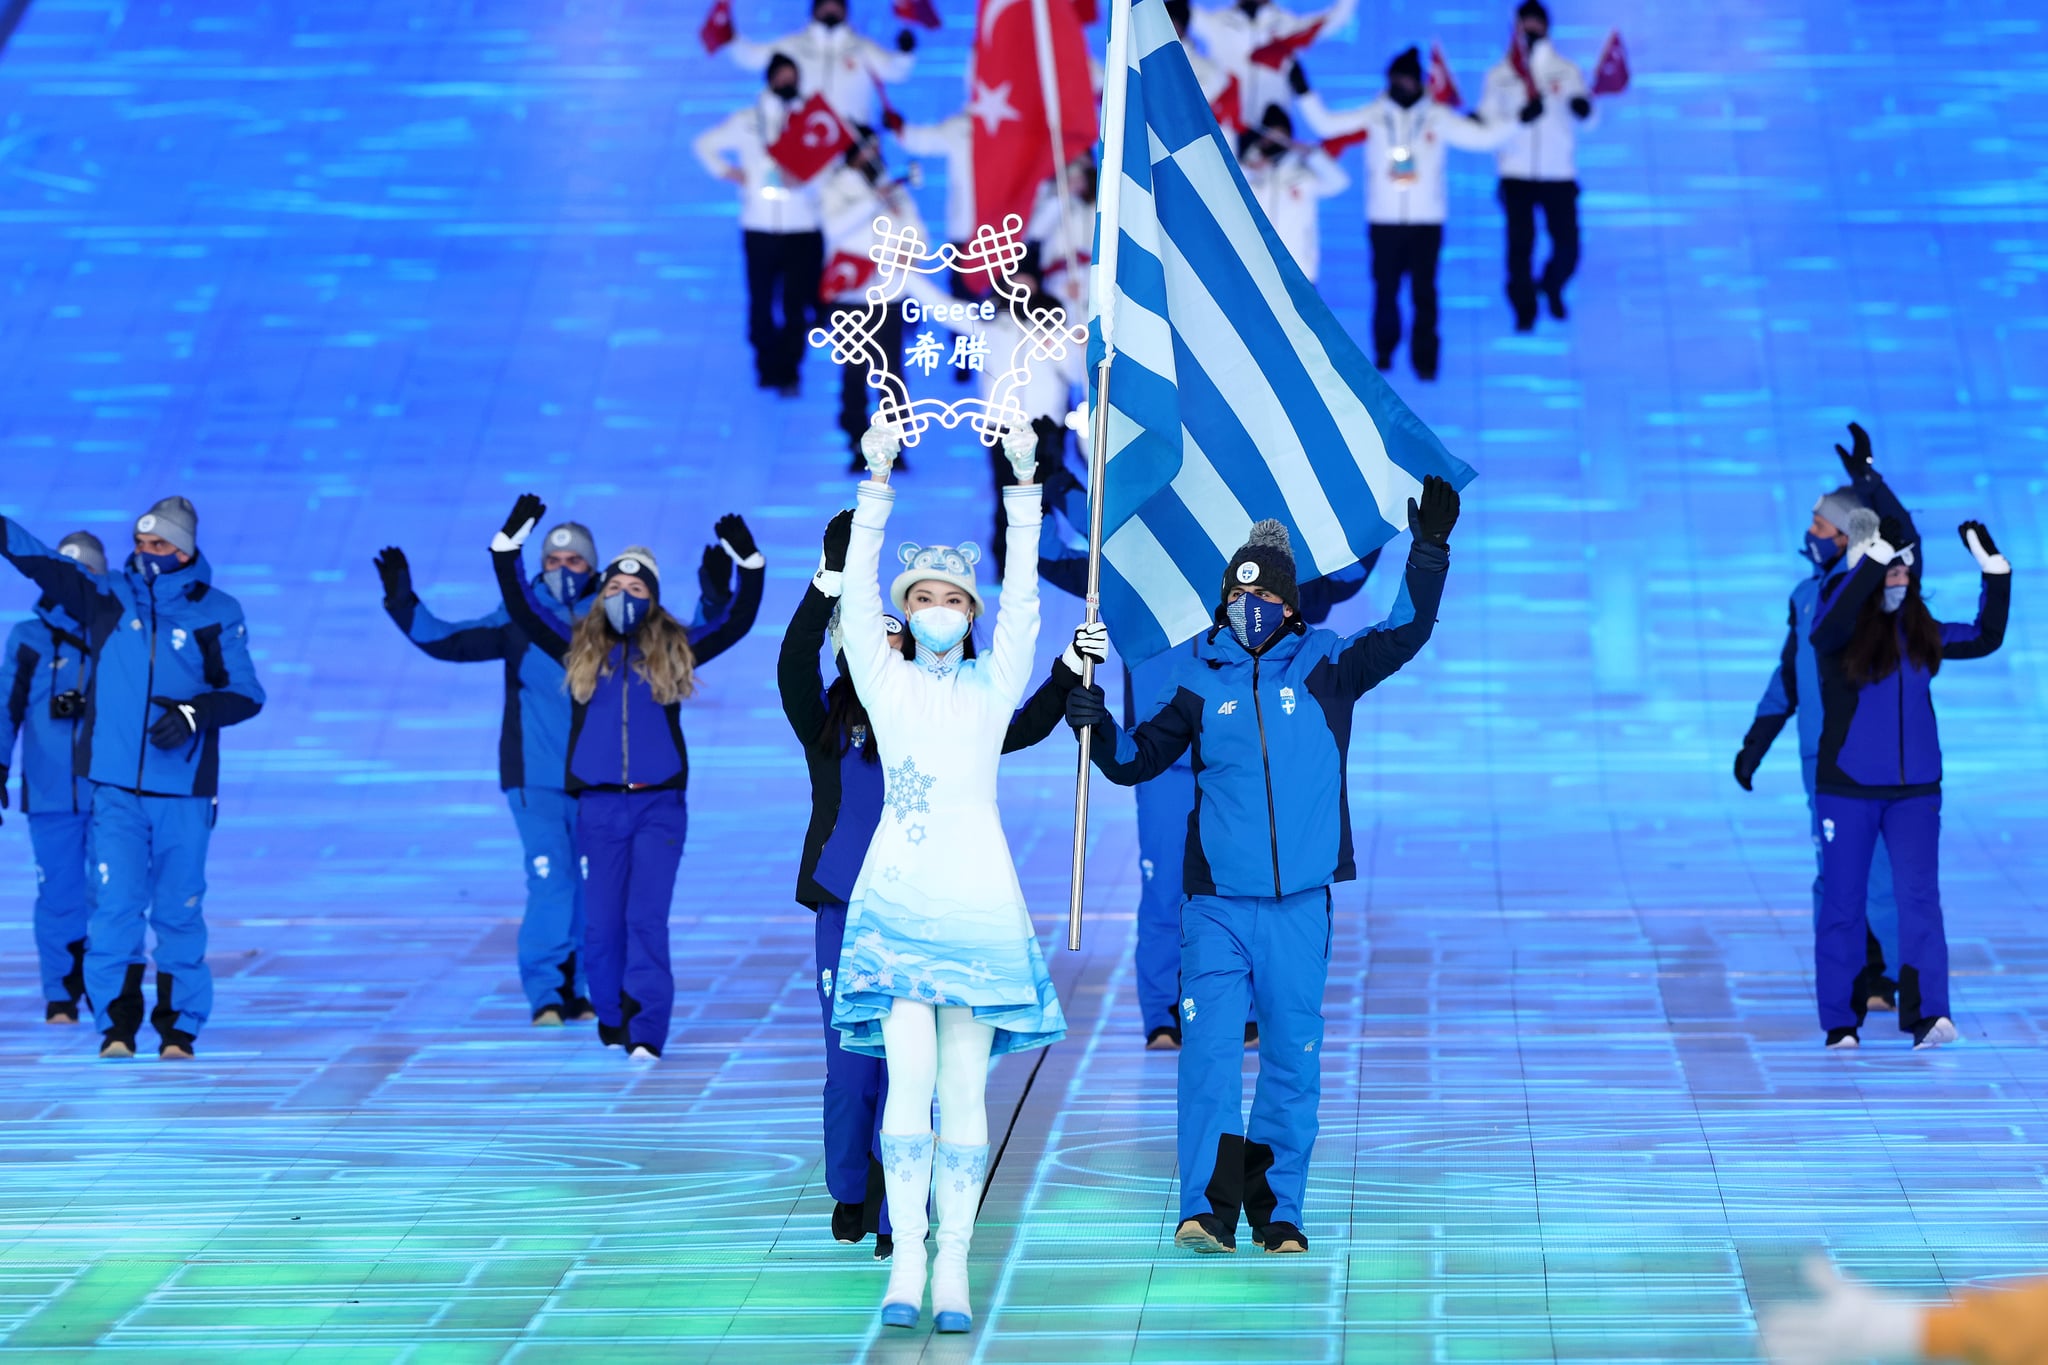 Why Greece Enters First in the Olympic Parade of Nations POPSUGAR Fitness